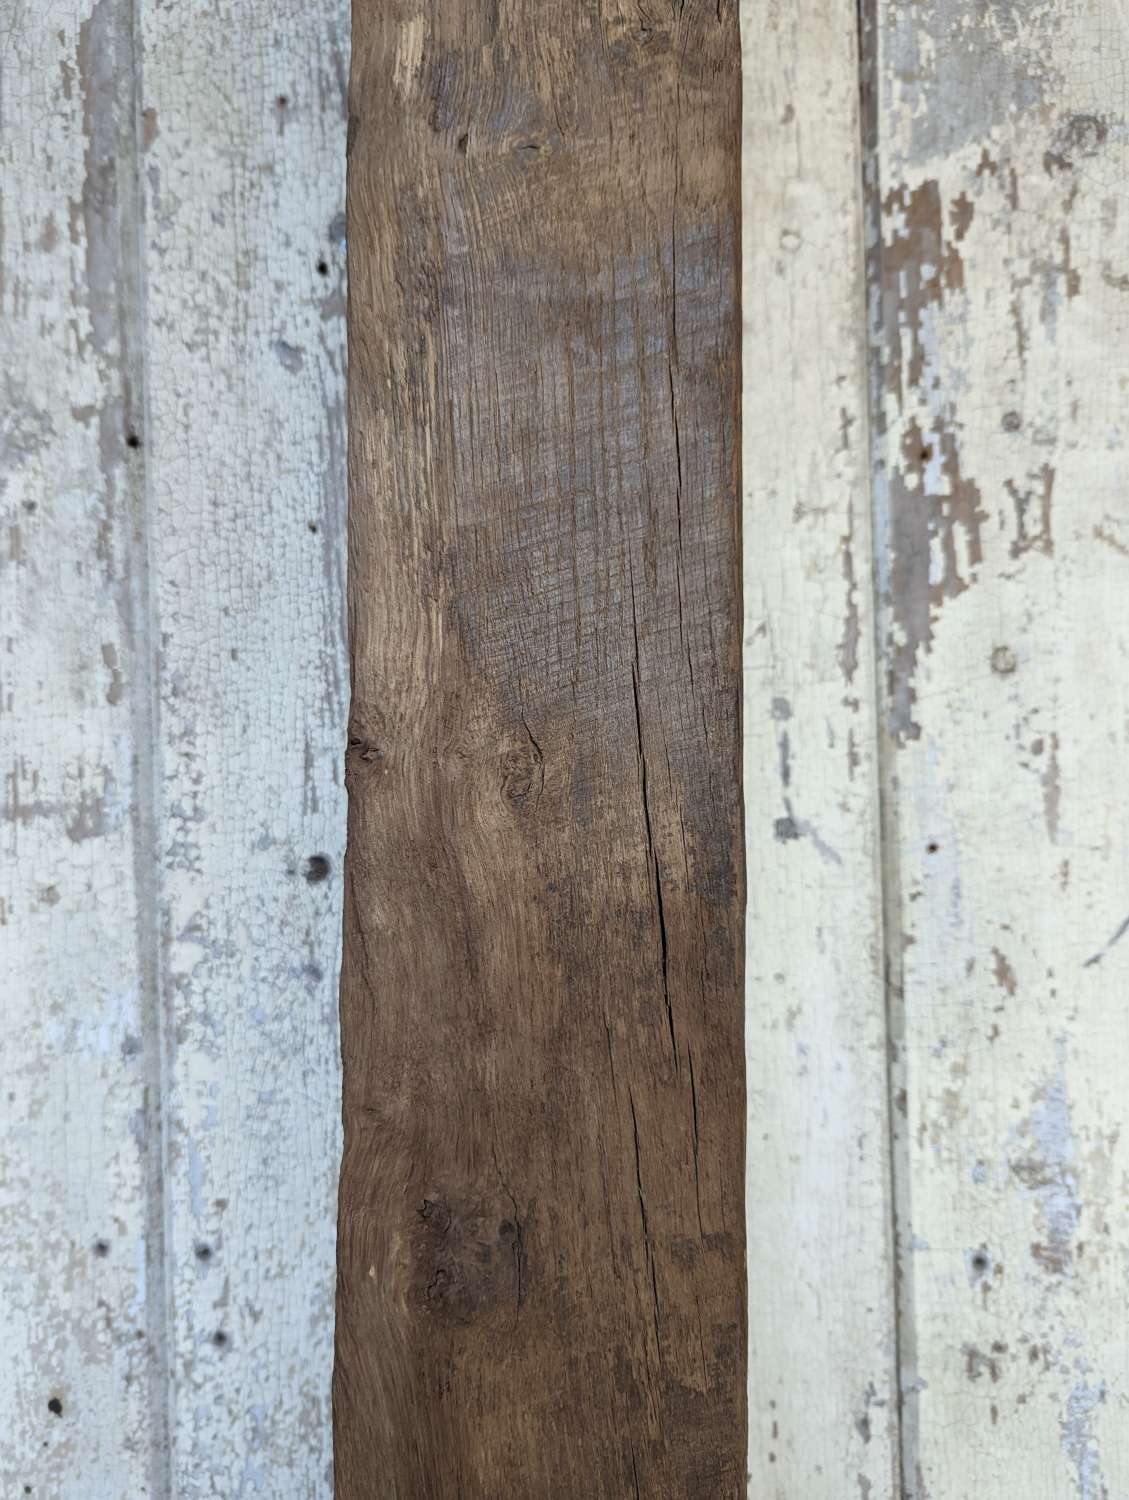 M1756 A LARGE RUSTIC RECLAIMED OAK BEAM FOR PROJECT